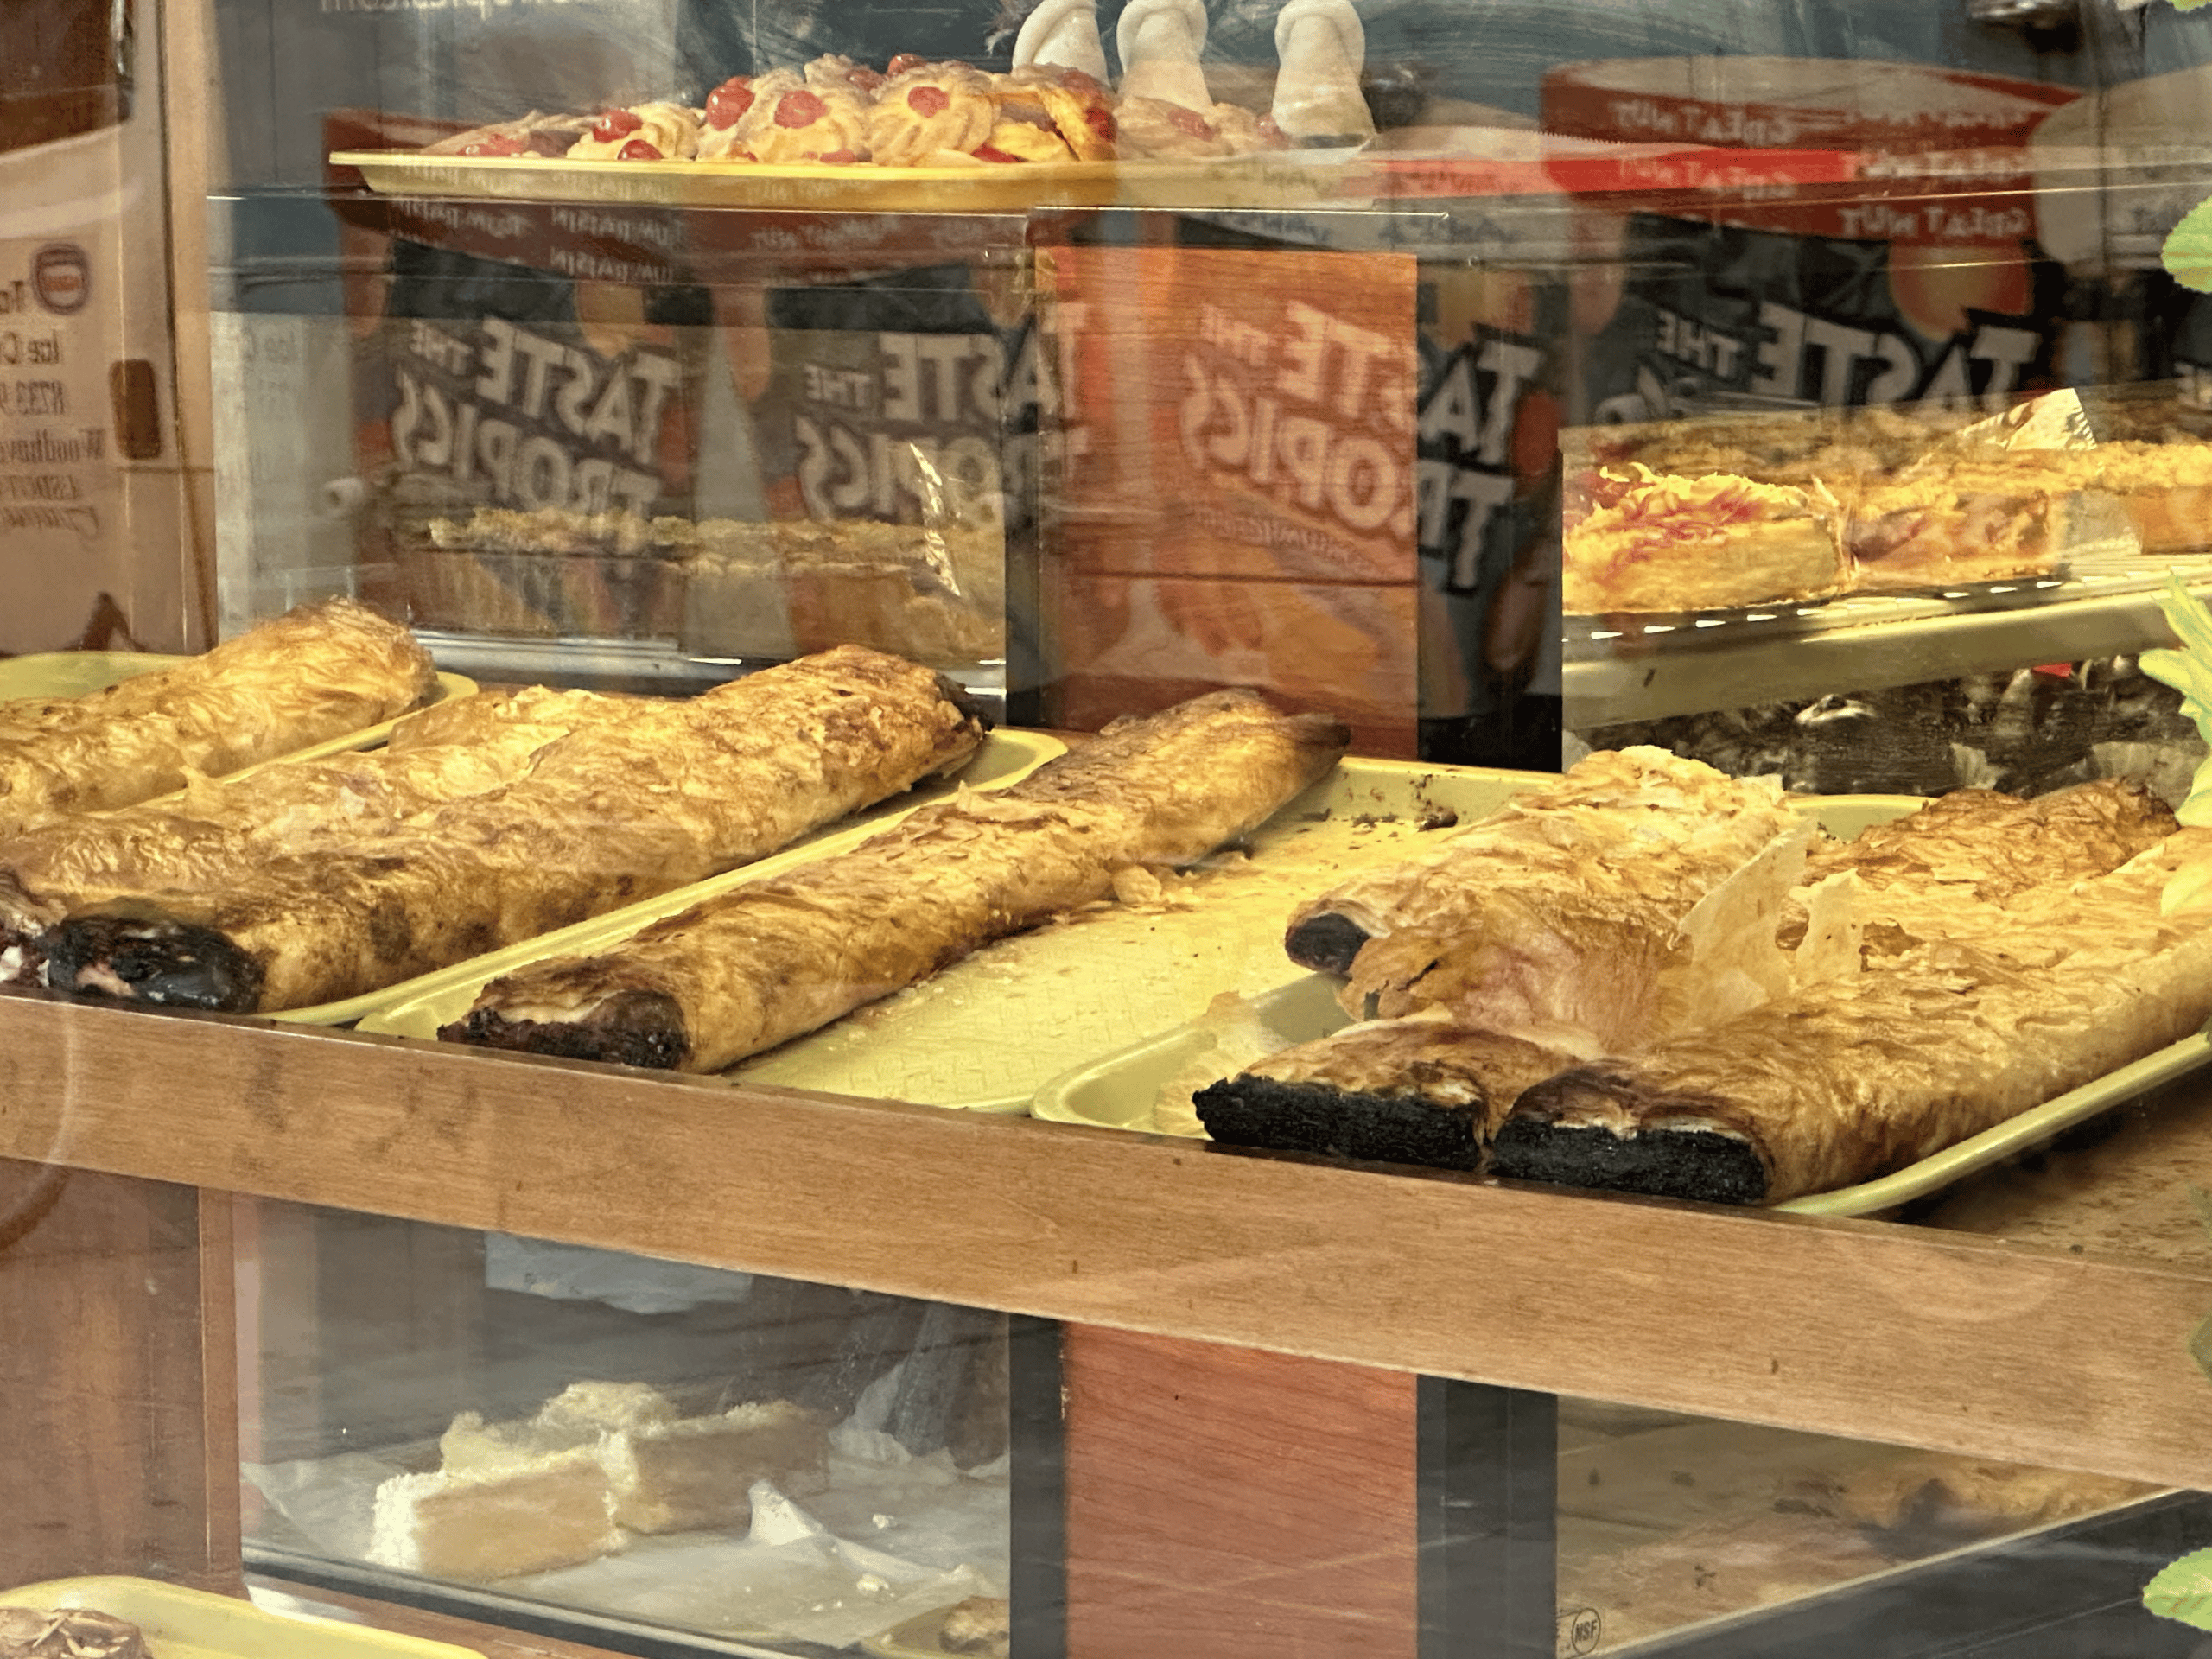 Pastries are for sale at Budapest Cafe despite the closure order | Upper East Site